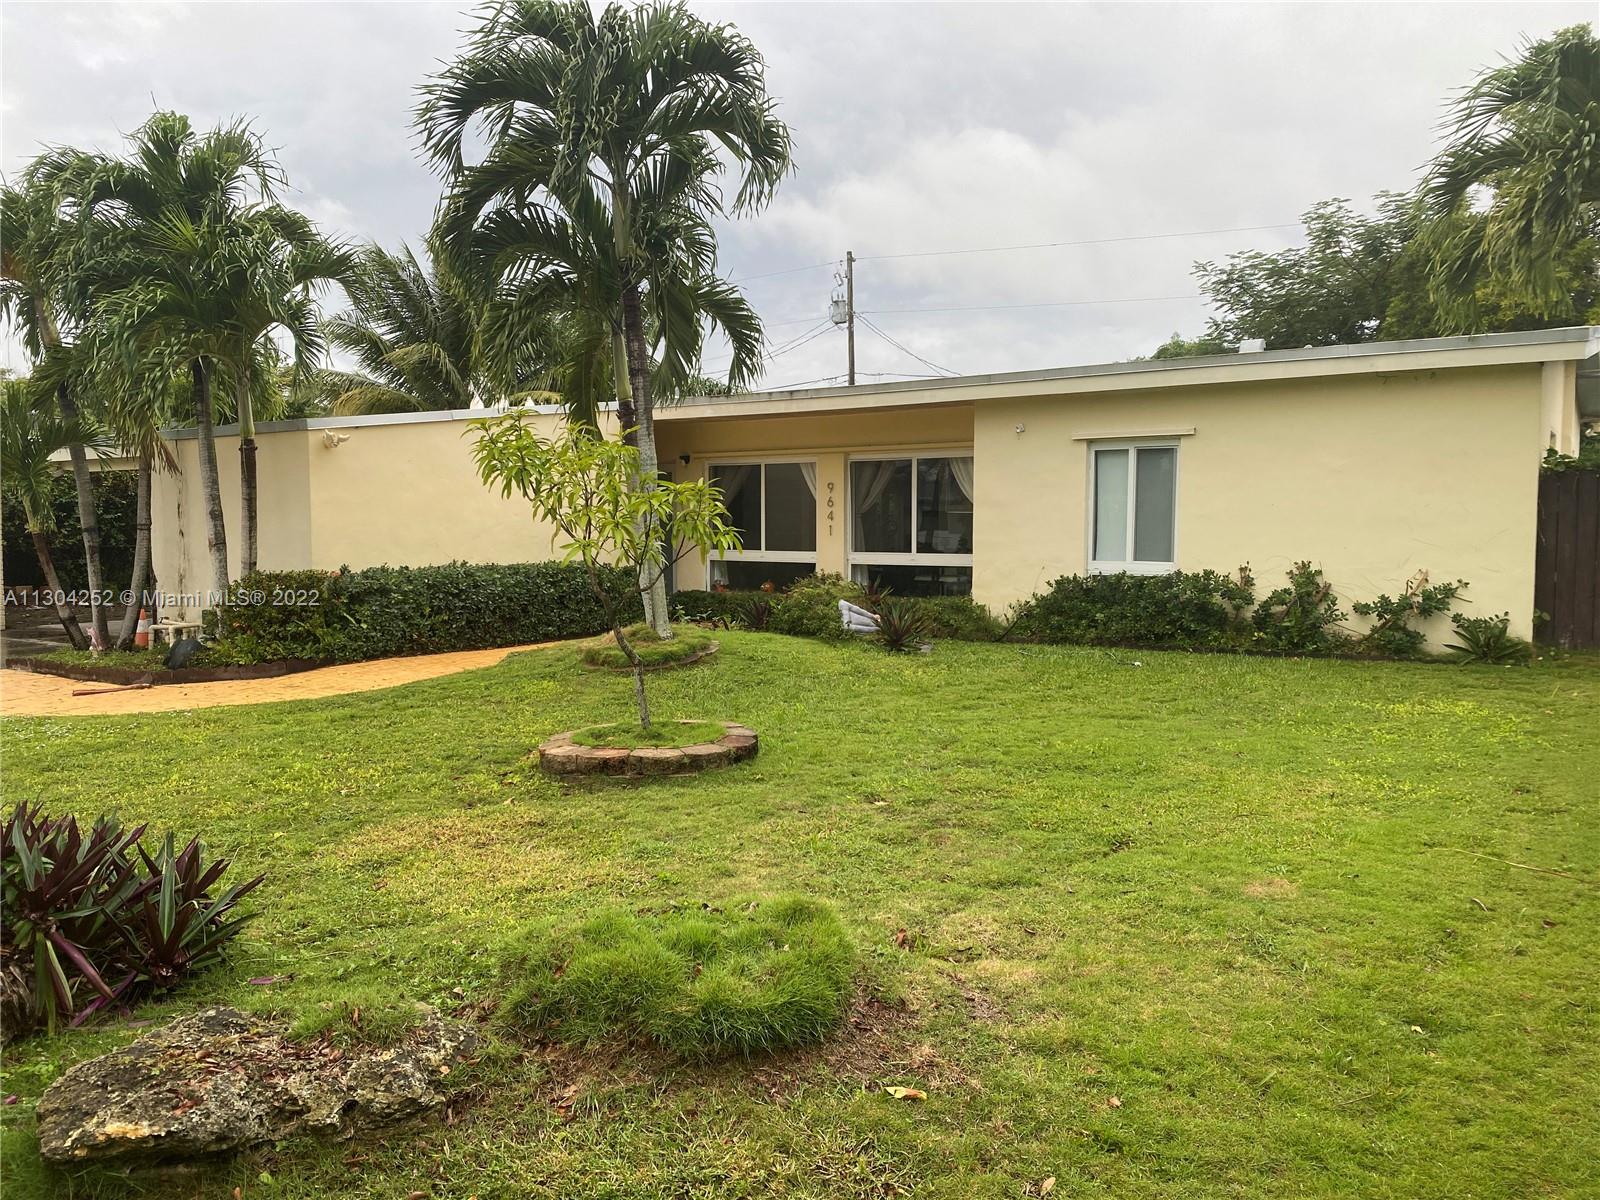 JUST REDUCED & READY TO SHOW *** 2019 SQUARE FEET UNDER ROOF, 3/2 BEDROOM BATH WITH LARGE 2-CAR CARPORT AND LAUNDRY ROOM *** NEWER ROOF AND ALL IMPACT DOORS AND WINDOWS WITH DESIRABLE SPLIT BEDROOM PLAN *** OUTSIDE FEATURES FENCED BACKYARD AND PRIVACY HEDGE IN THE FRONT *** LOCATED IN RECENTLY INCORPORATED CUTLER BAY, CLOSE TO TURNPIKE, GOVERNMENT CENTER, CUTLER BAY HIGH SCHOOL, AND POPULAR BLACK POINT MARINA ***